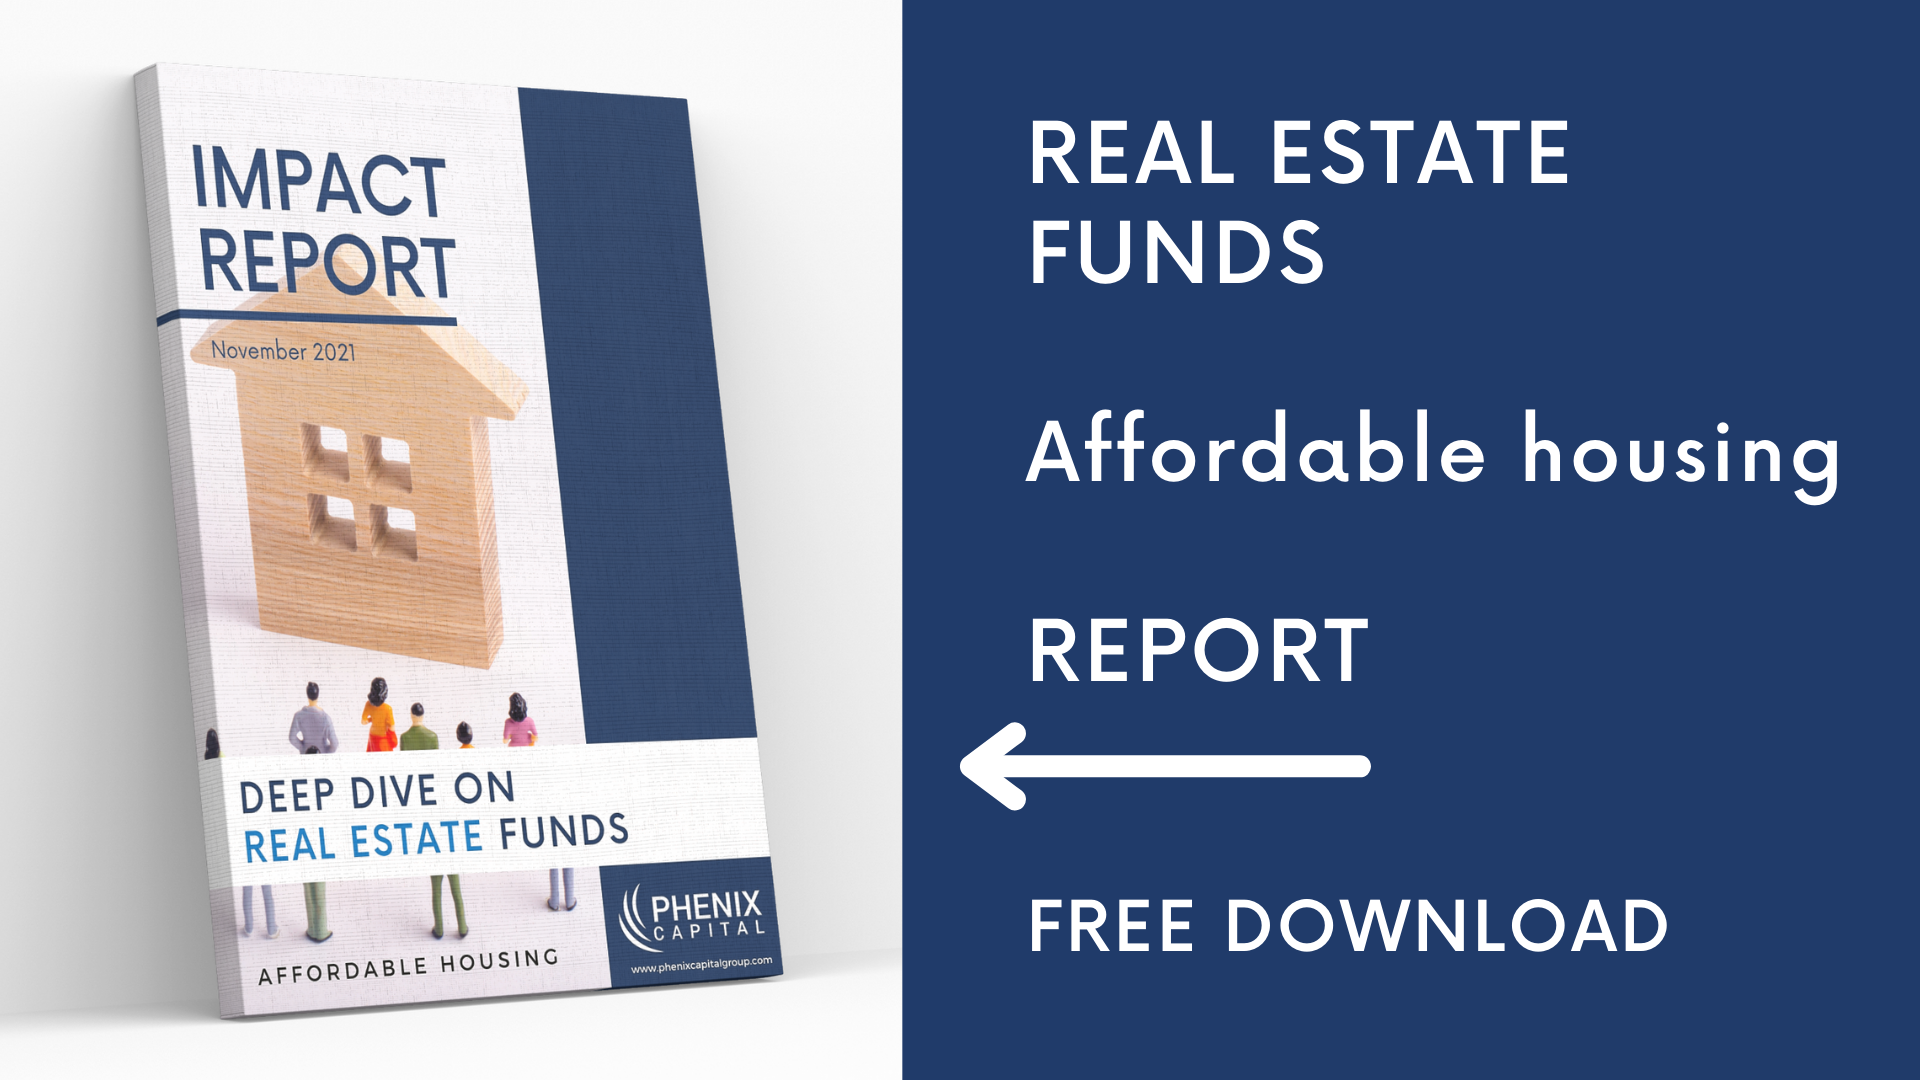 PRESS RELEASE: Investment strategies with a focus on Real Estate and Affordable Housing